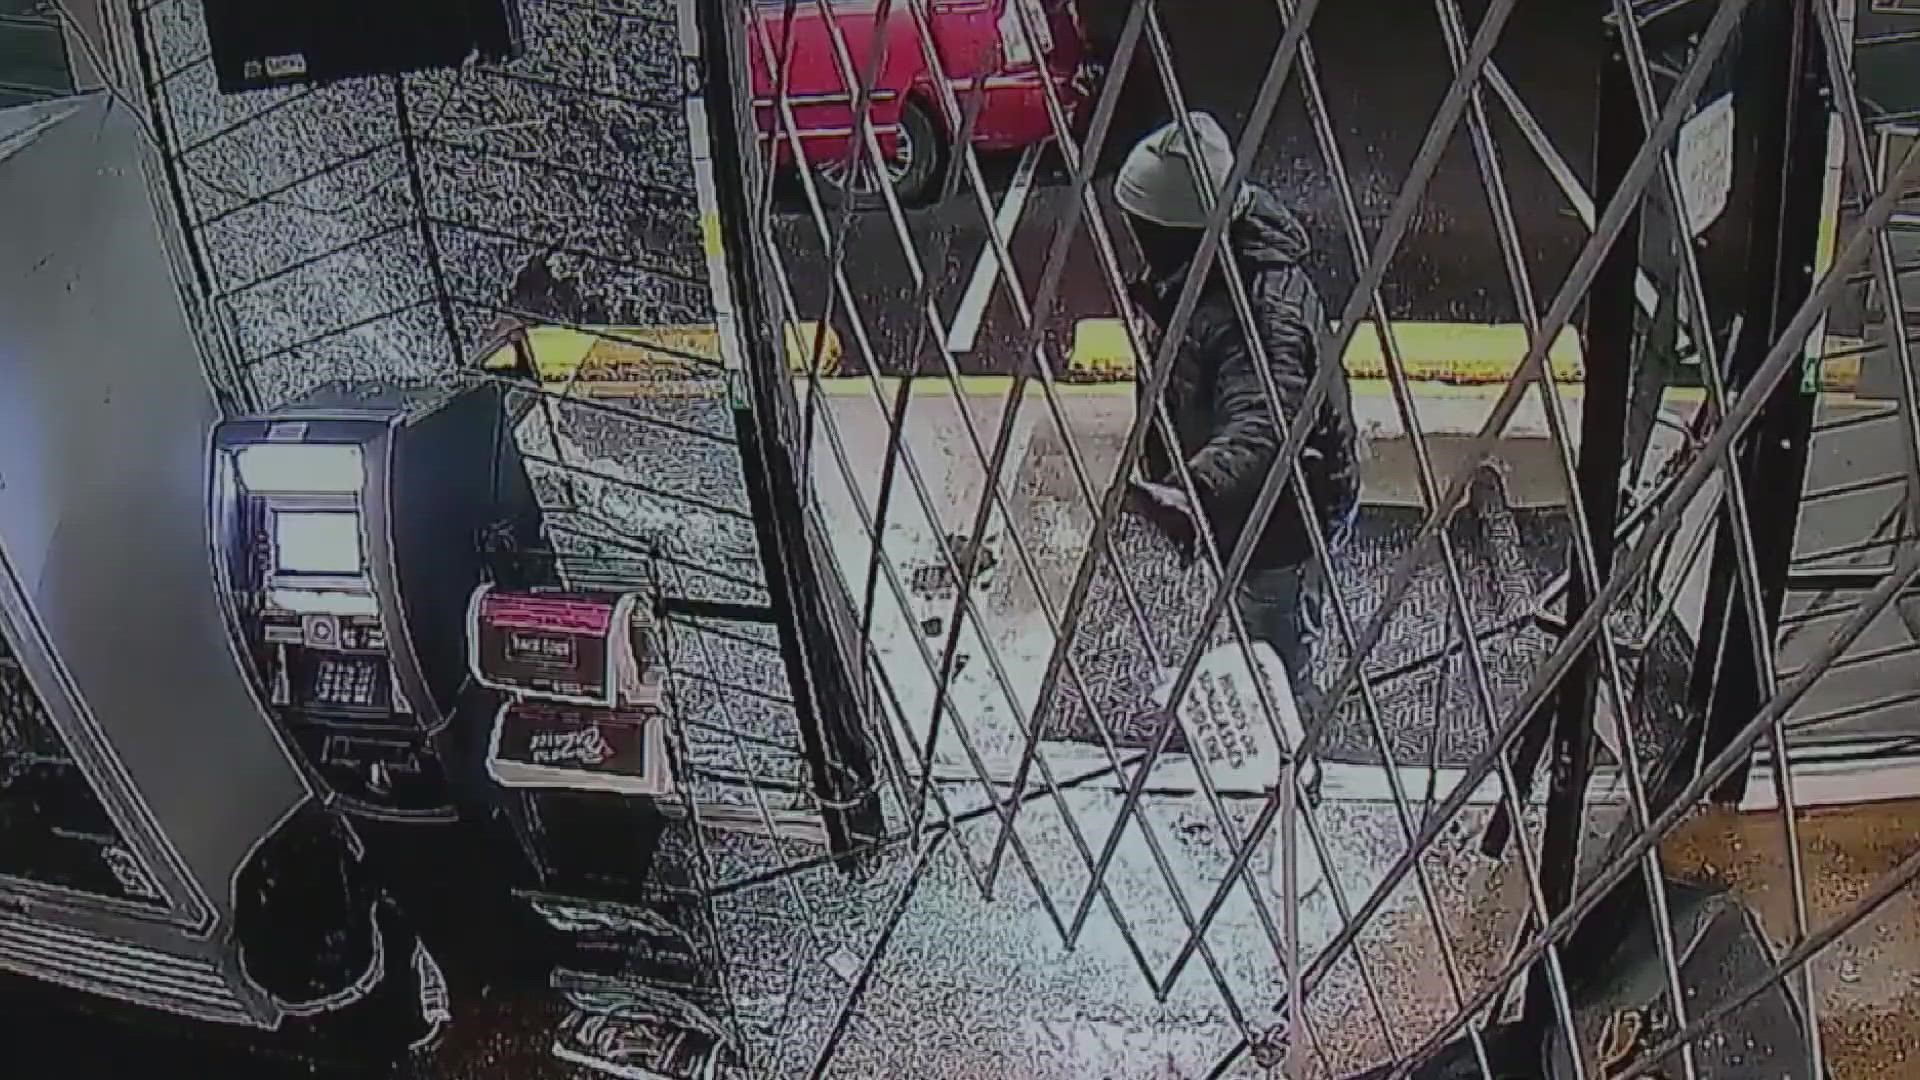 Security video shows two burglars at Dank's Wonder Emporium trying to first break in with a sledgehammer and then using their minivan to ram the front windows.